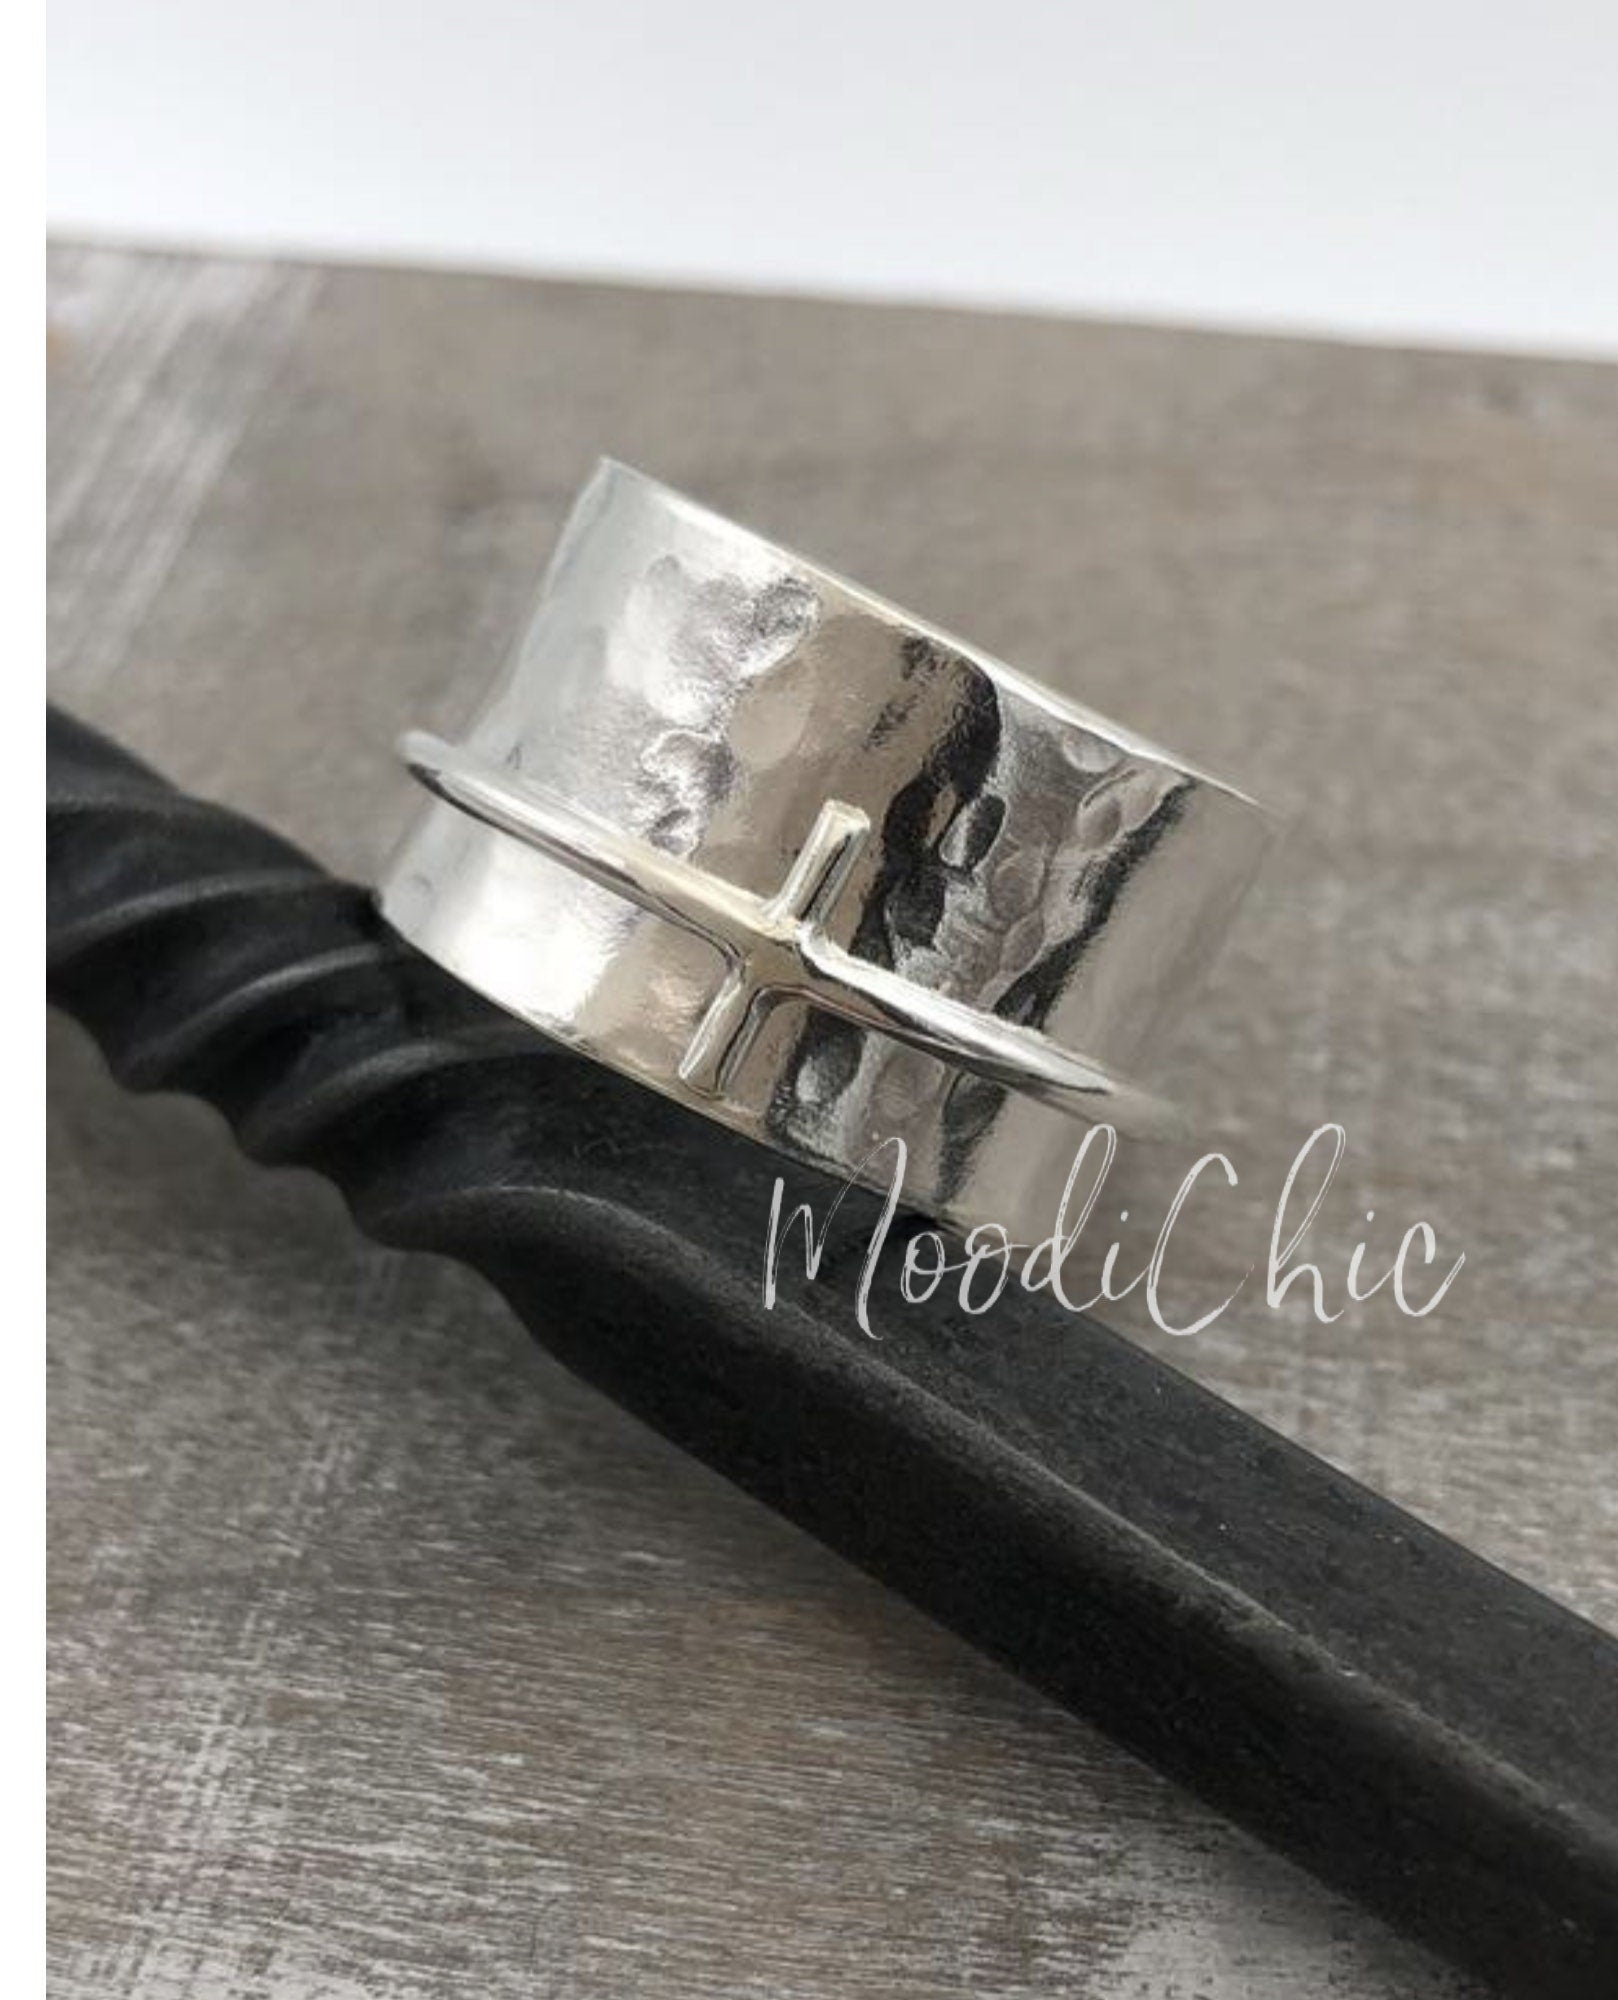 Spinner Ring with Cross - Sterling Silver Ring - Wide Band Ring - Christian Ring - Gift for her - Meditation Ring